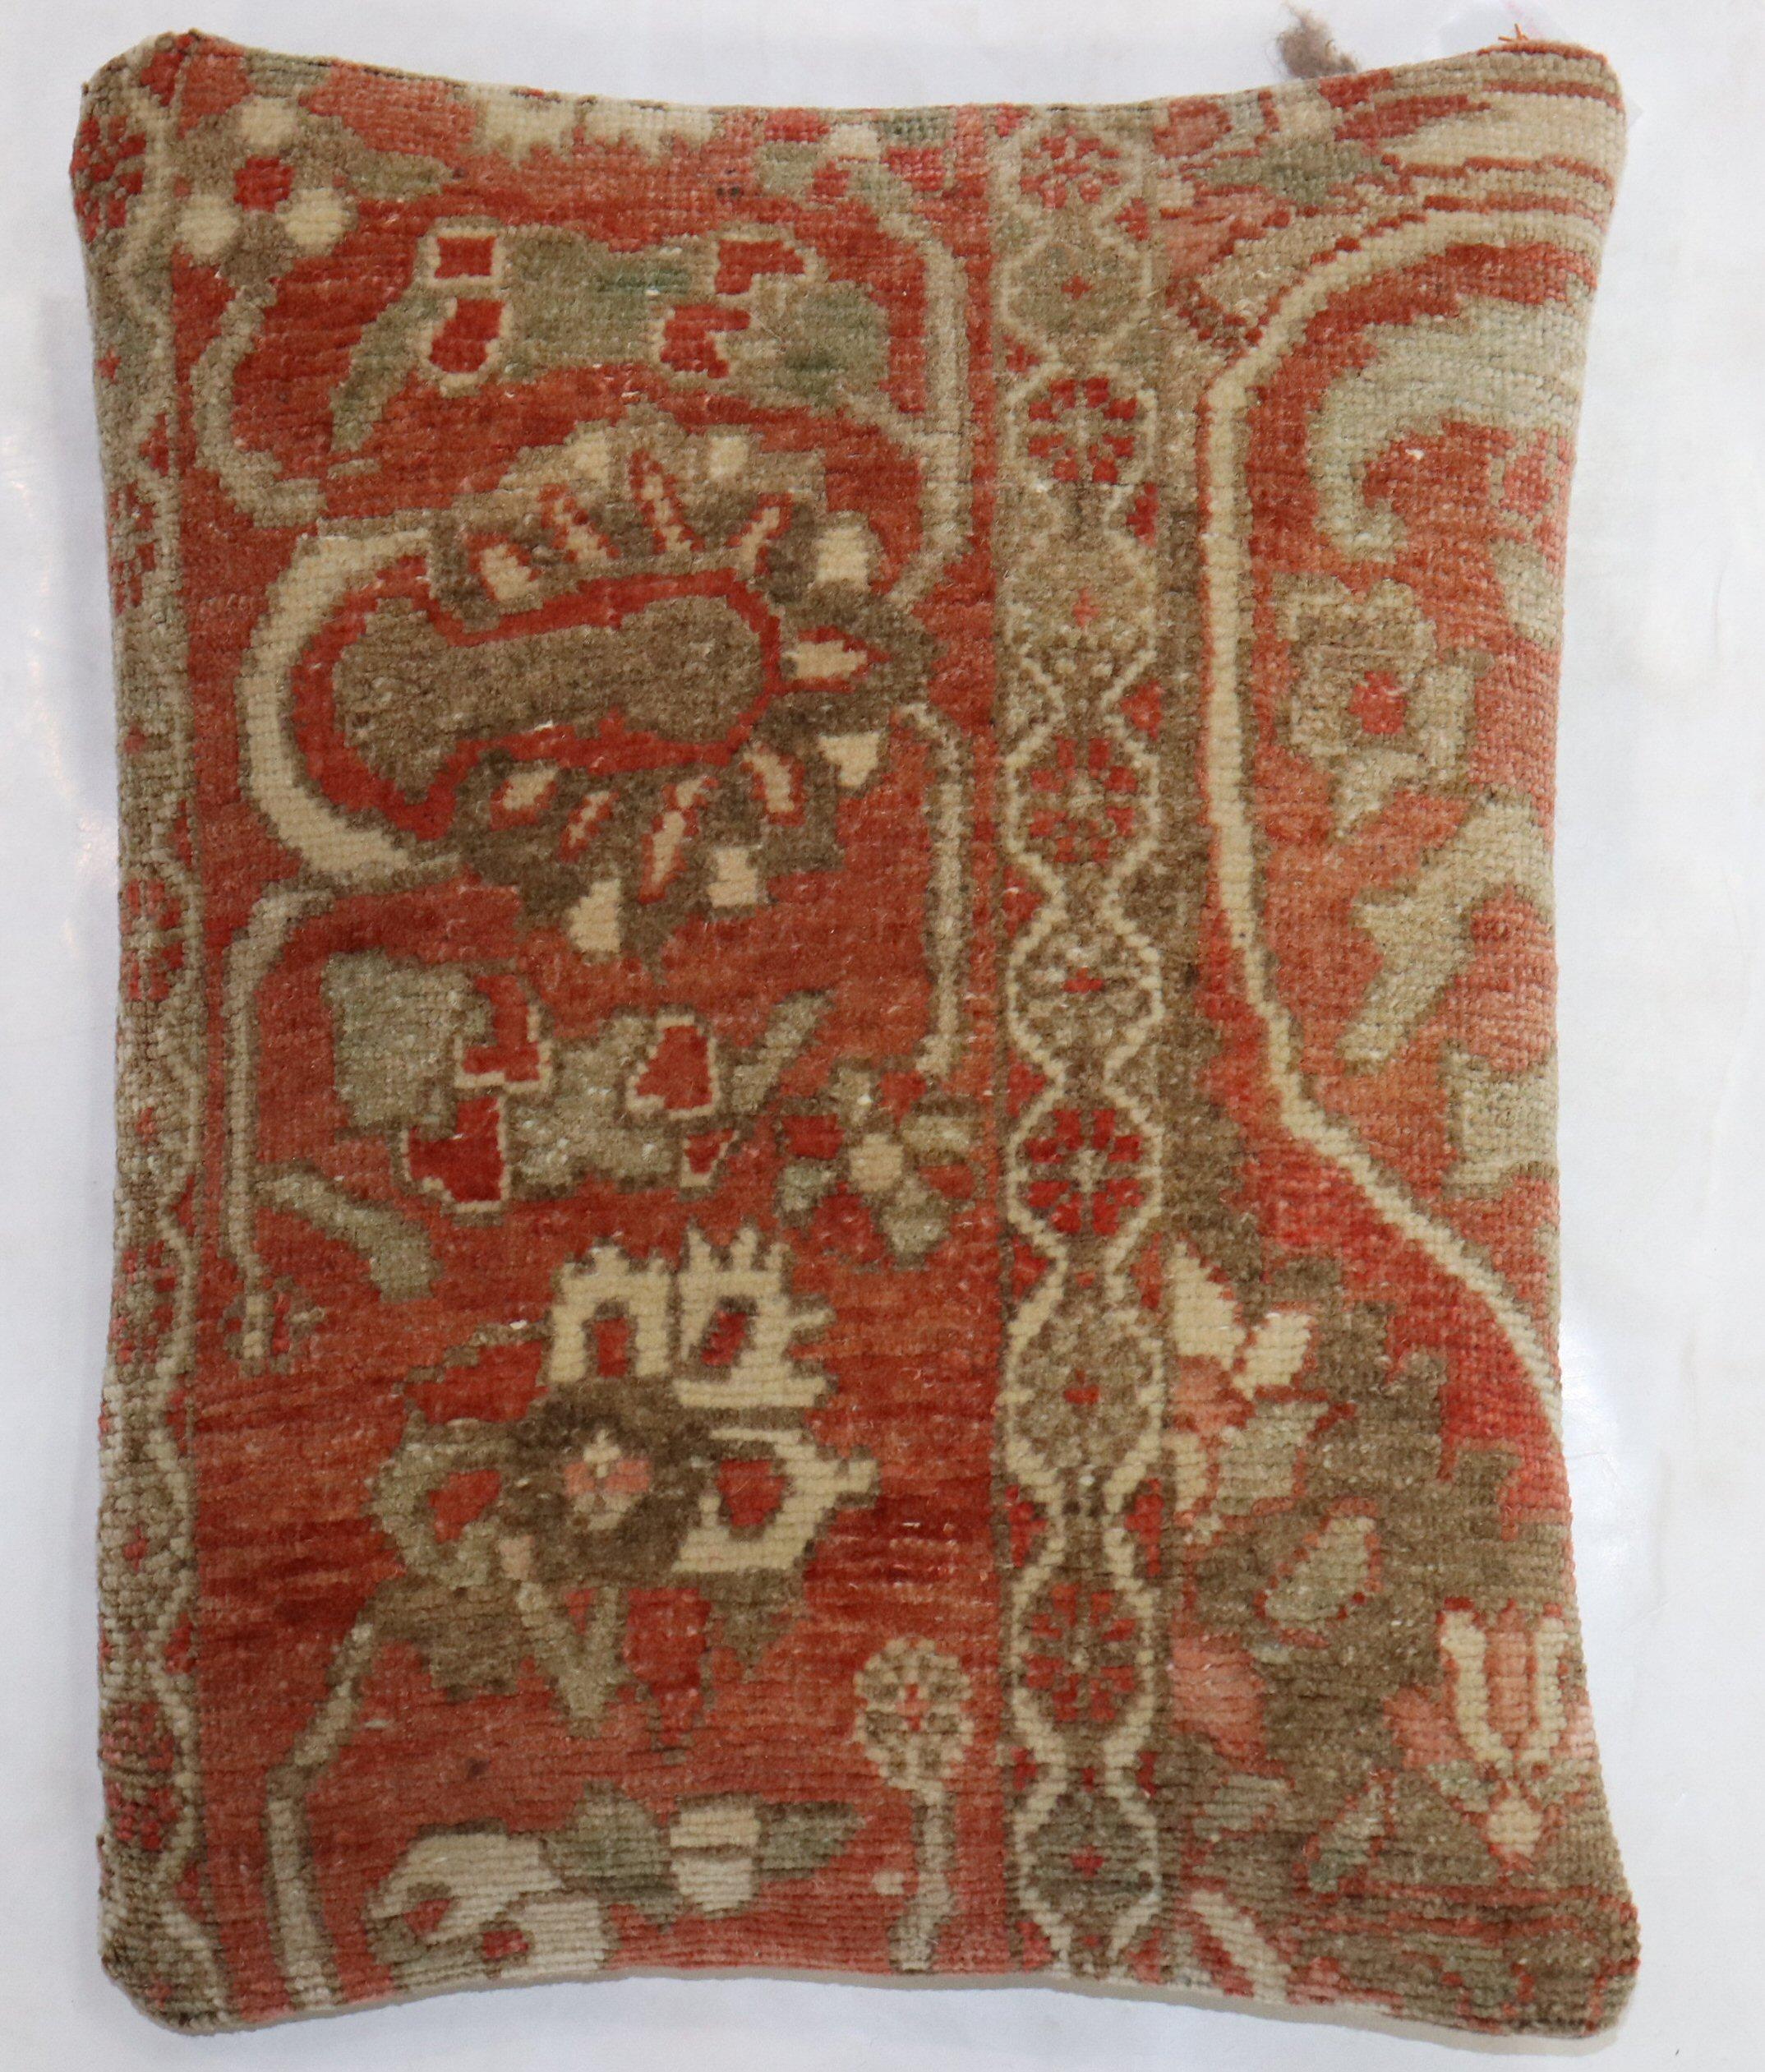 Pillow made from an antique persian  rug with poly fill and zipper closure provided.

Measures: 16'' x 20''.